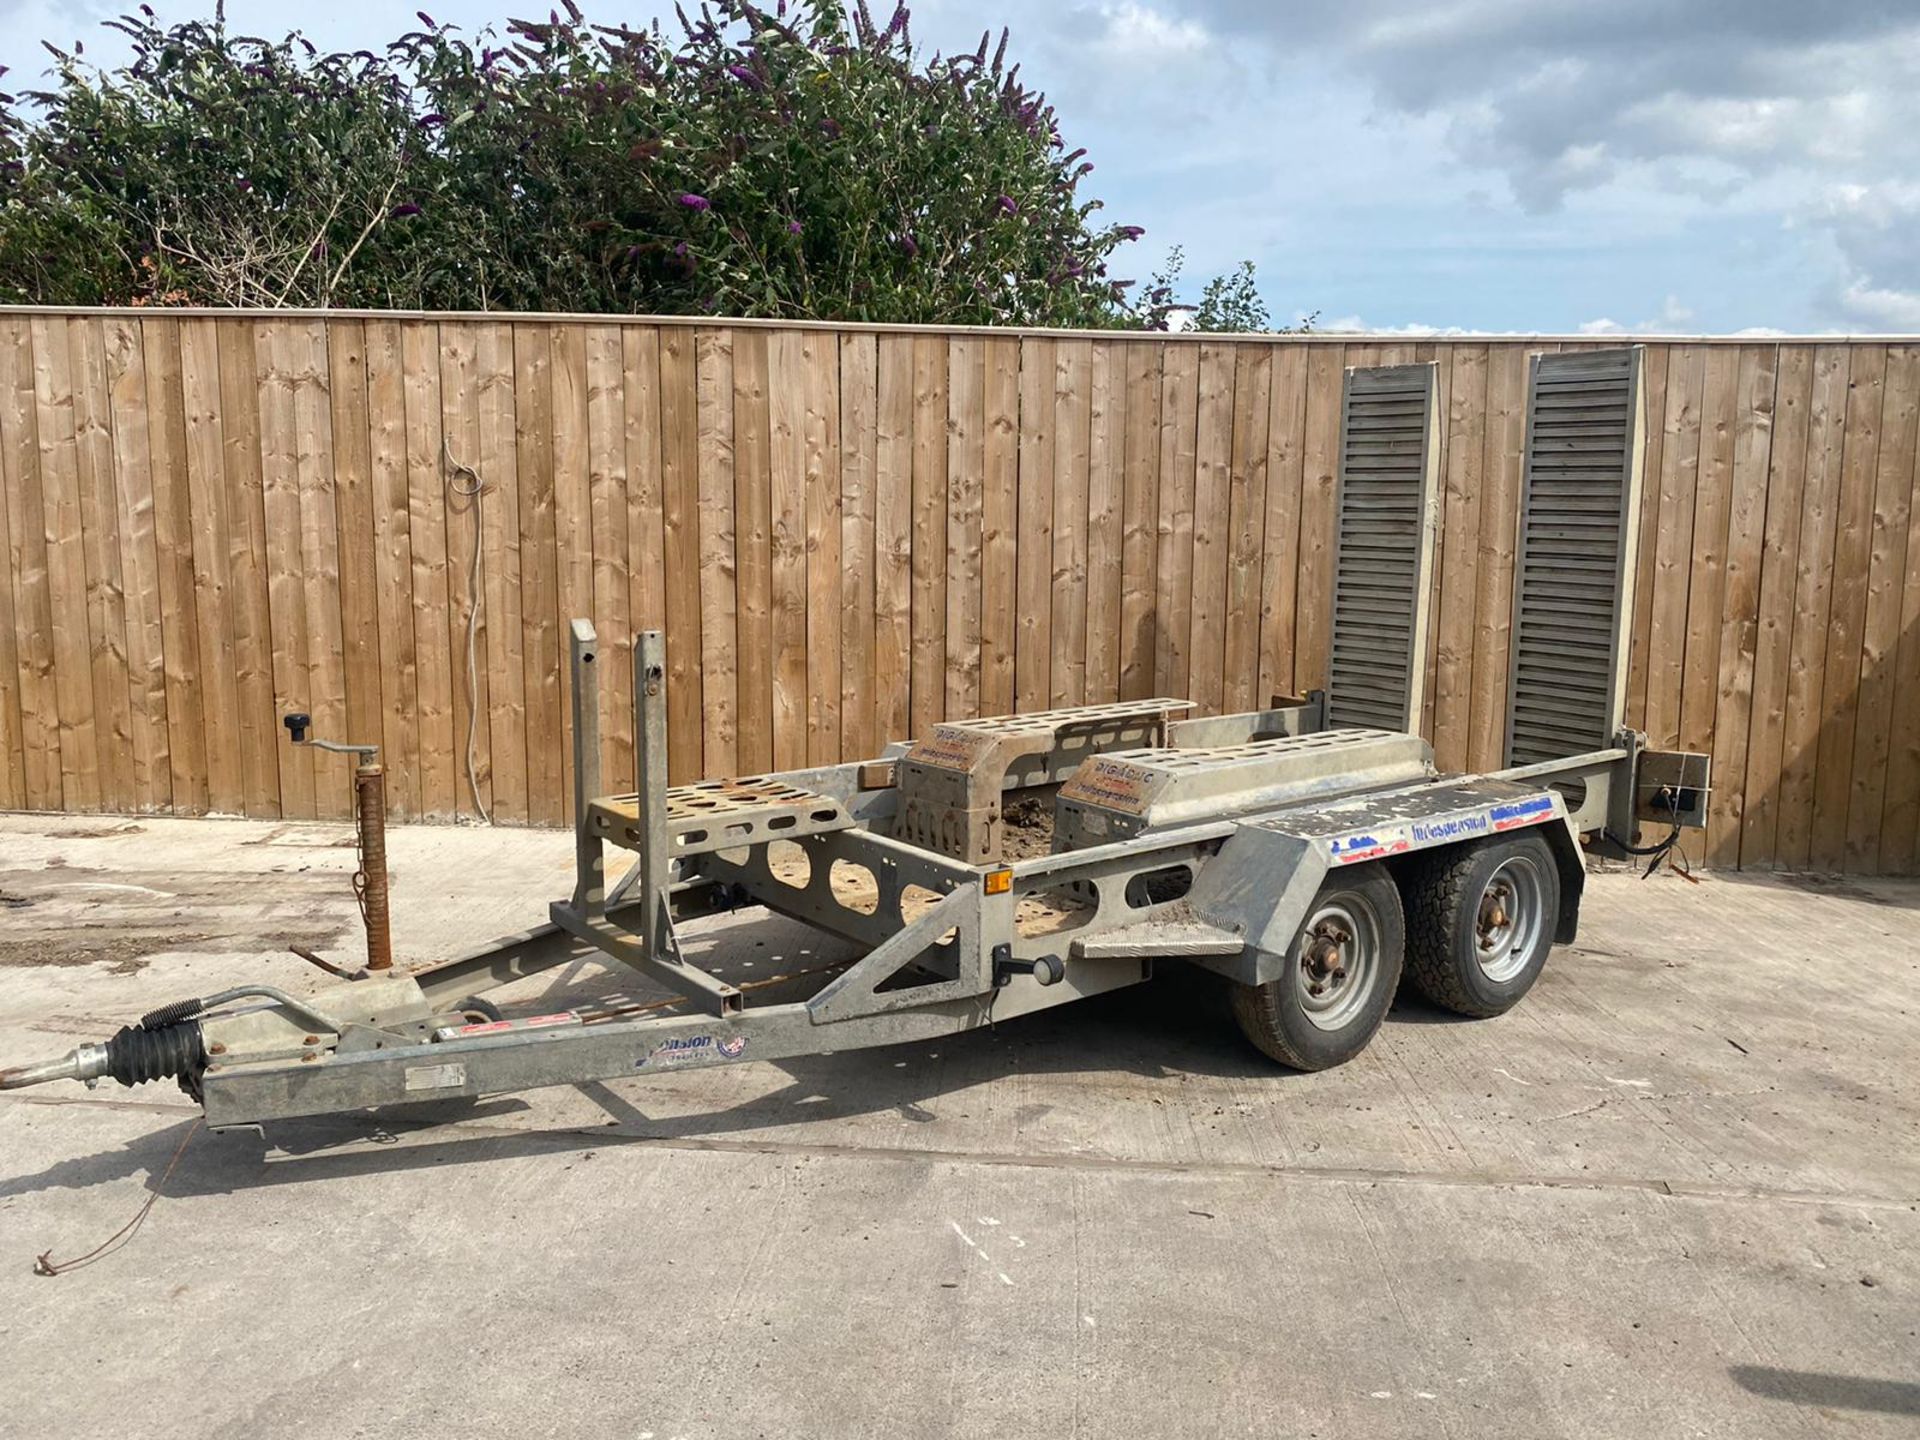 2017 INDESPENSION PLANT MINI DIGGER  TRAILER.LOCATION NORTH YORKSHIRE. - Image 5 of 6